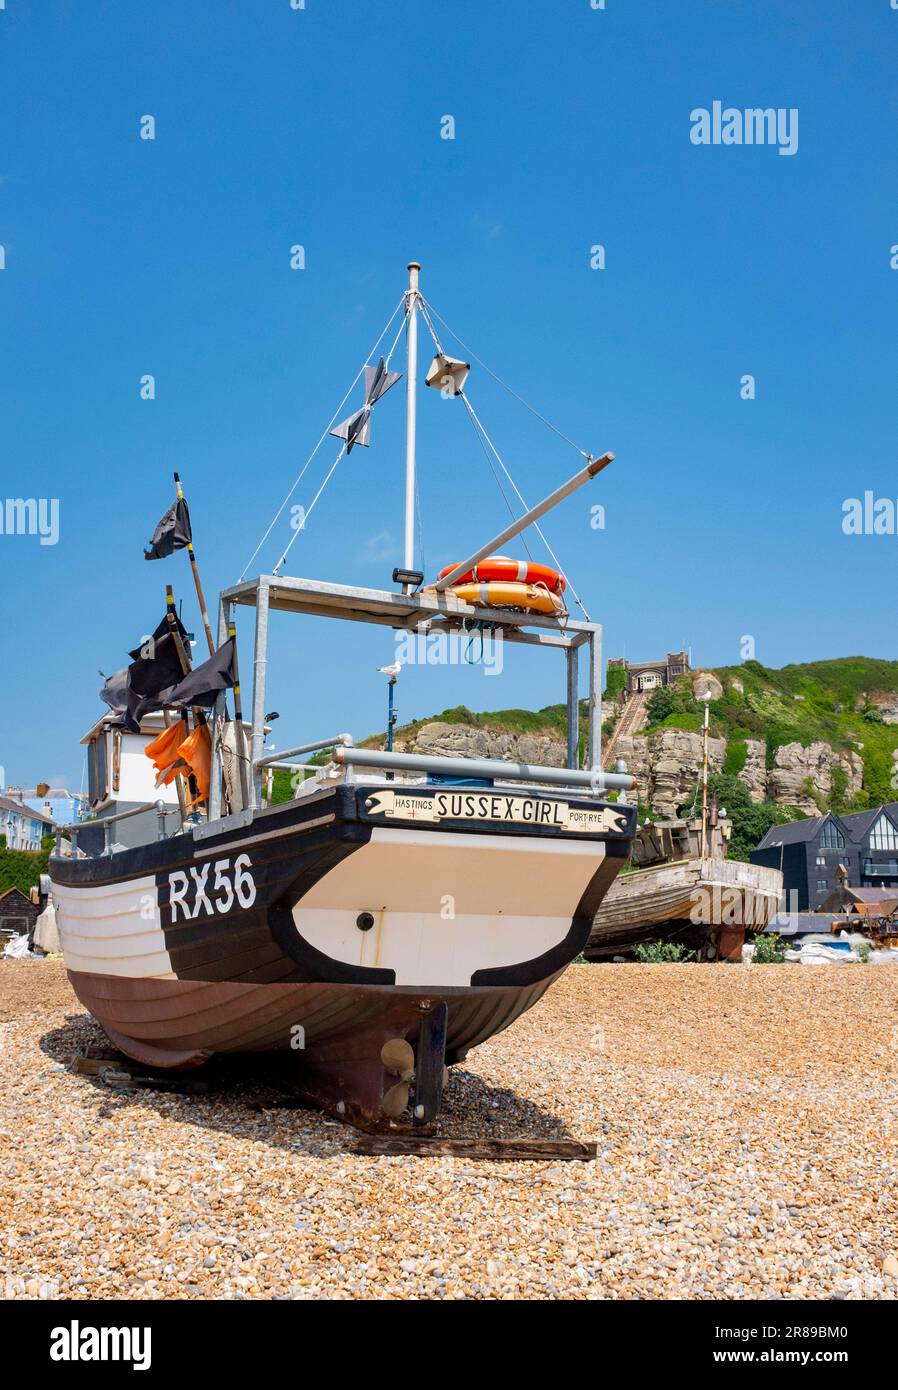 Hastings East Sussex , England UK -  Hastings Old Town Stade fishing boats . Hastings has one of Britain's oldest fishing fleets and boats have worked from the shingle beach known as the Stade (an old Saxon word for 'landing place') for over 1,000 years. Stock Photo